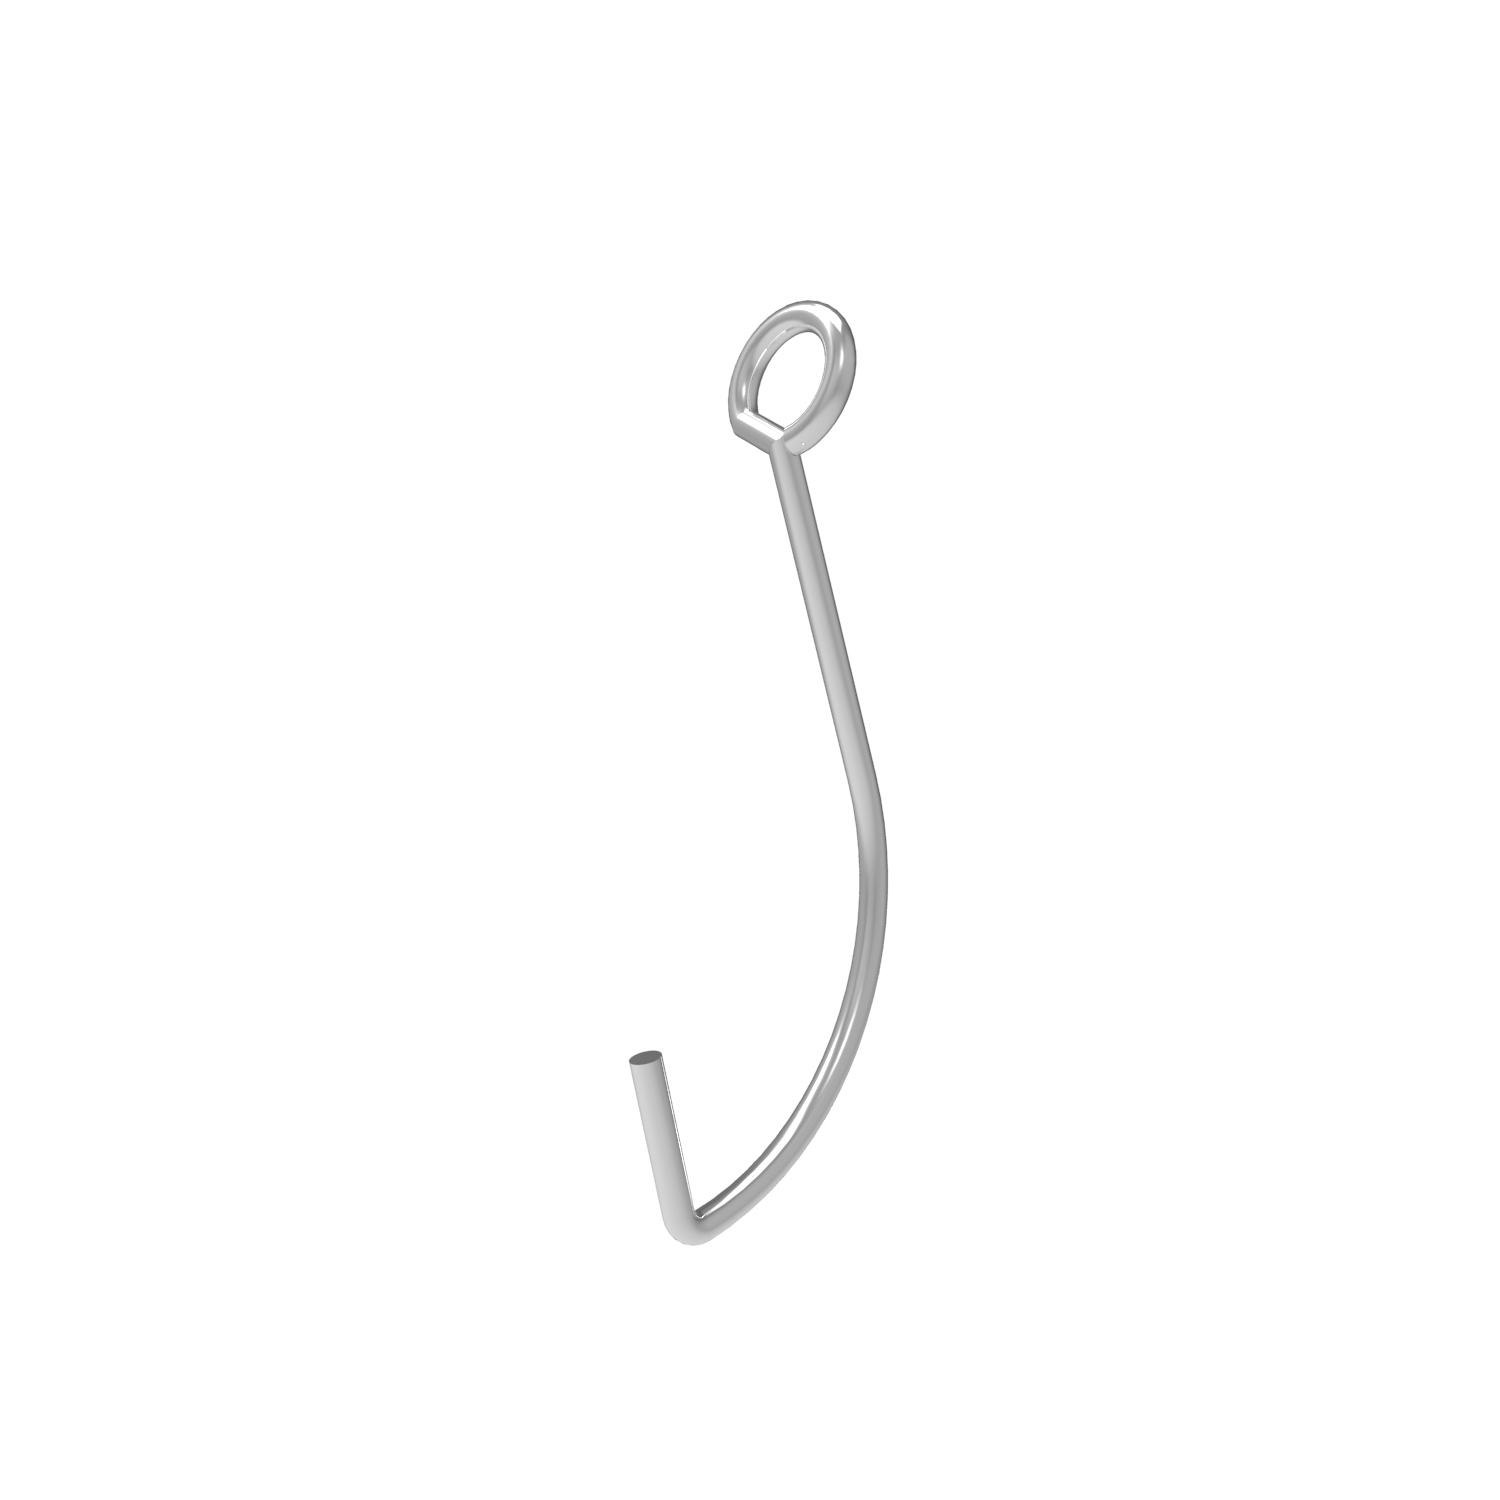 Retractor NAKAMURA Fish-Hook Type Large One Pair, Surgical instruments